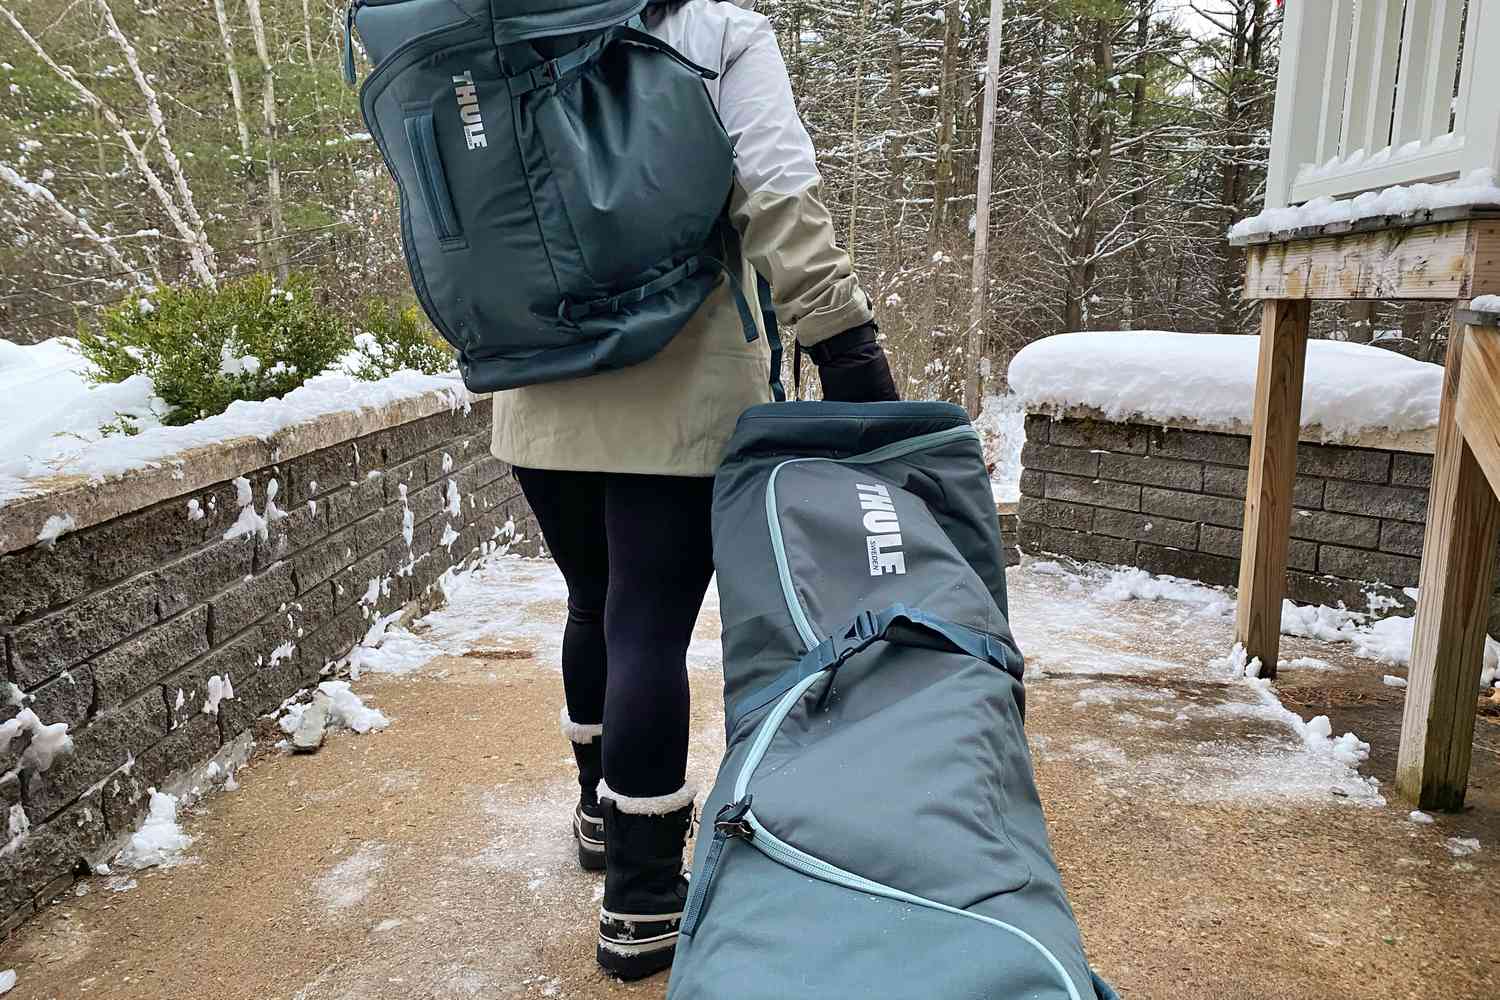 Person carries a Thule RoundTrip Ski Roller Ski Bag outdoors